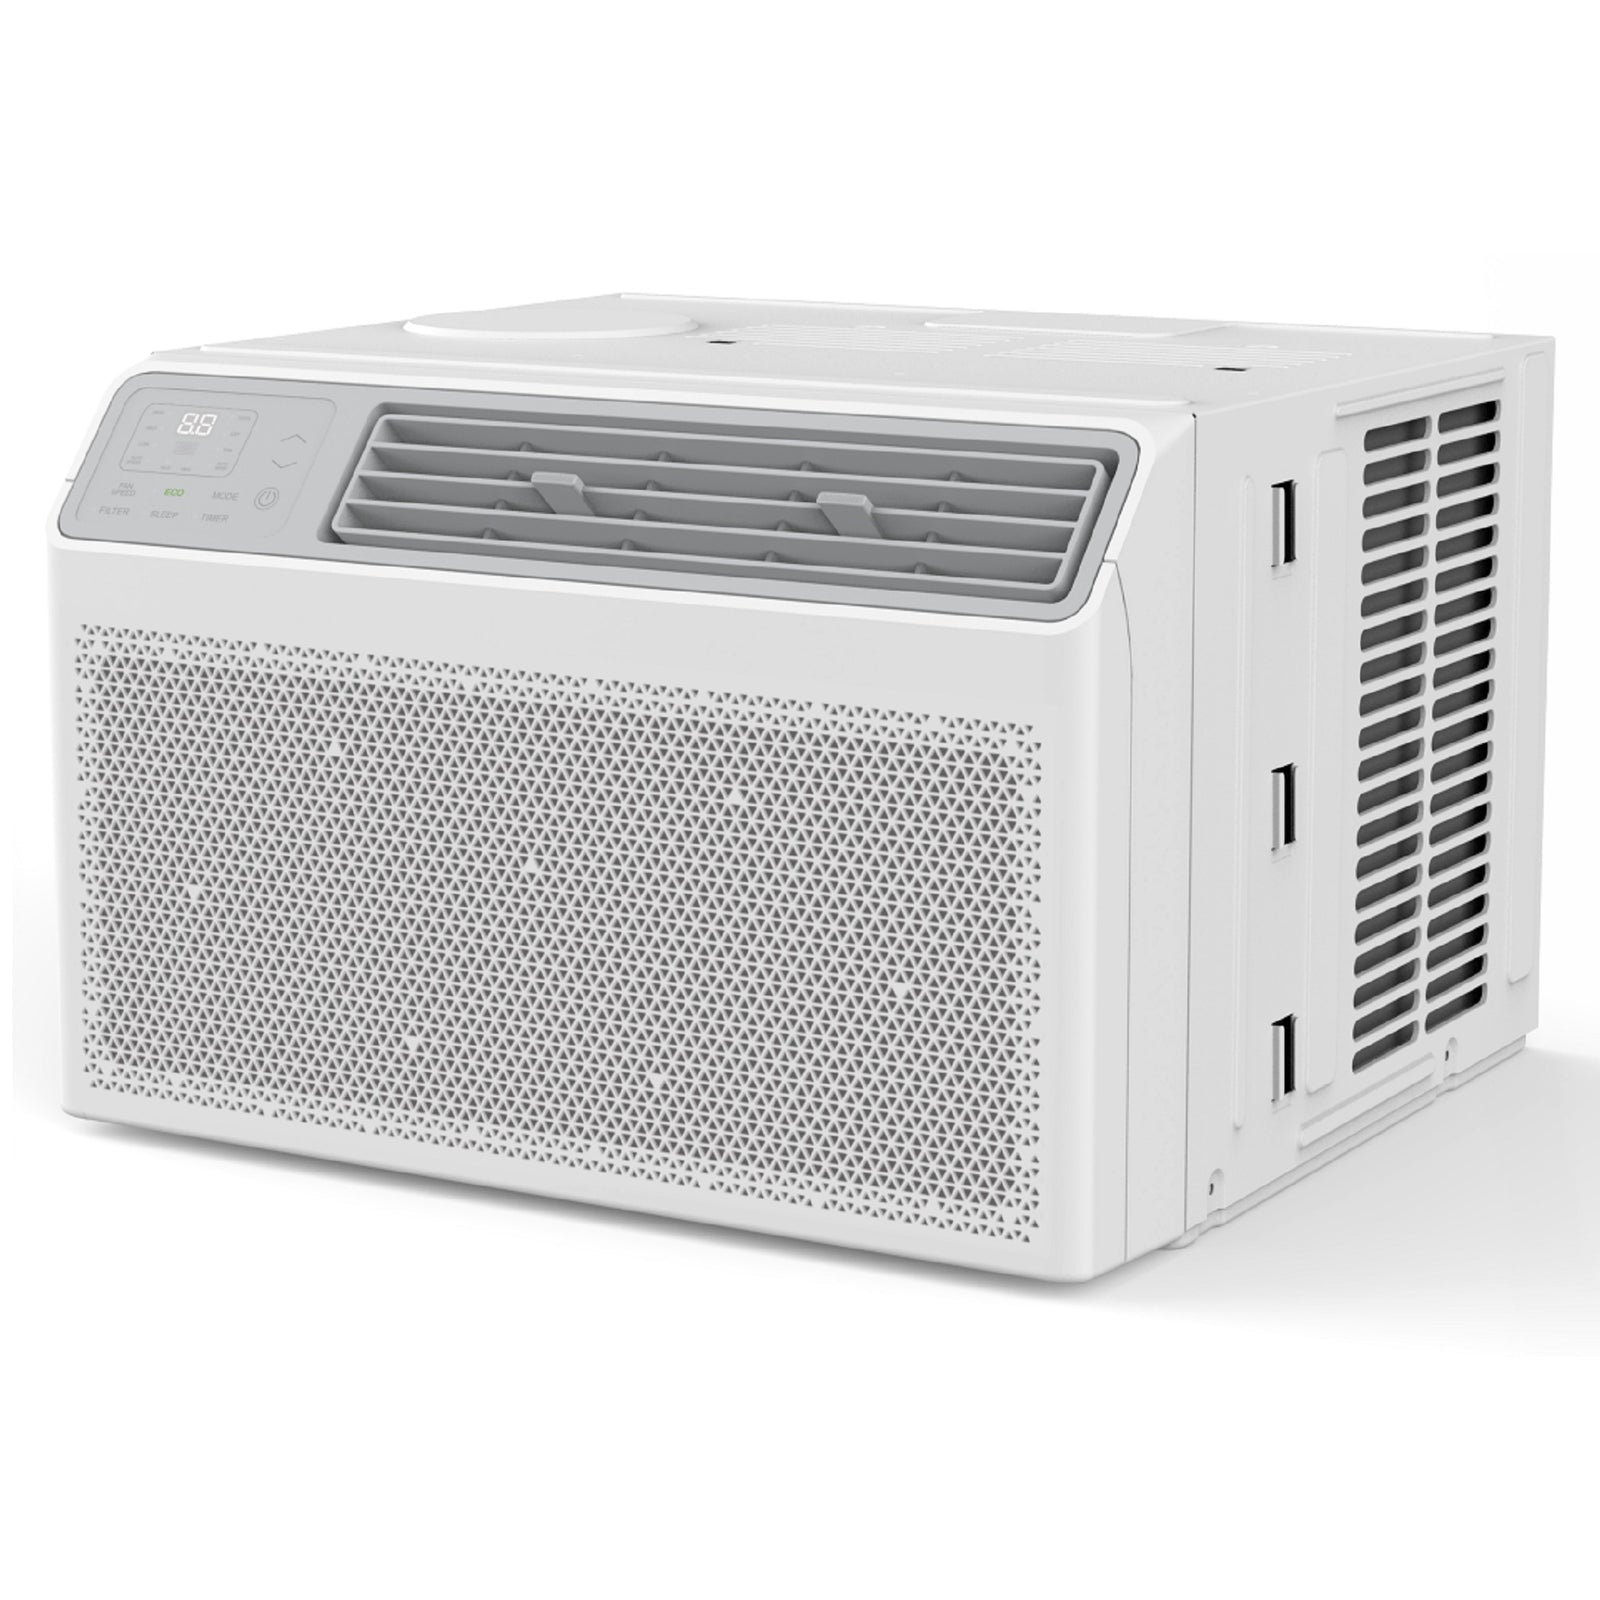 SAMSUNG AWCGHLAWKNTC Window-type Compact Air Conditioner Samsung